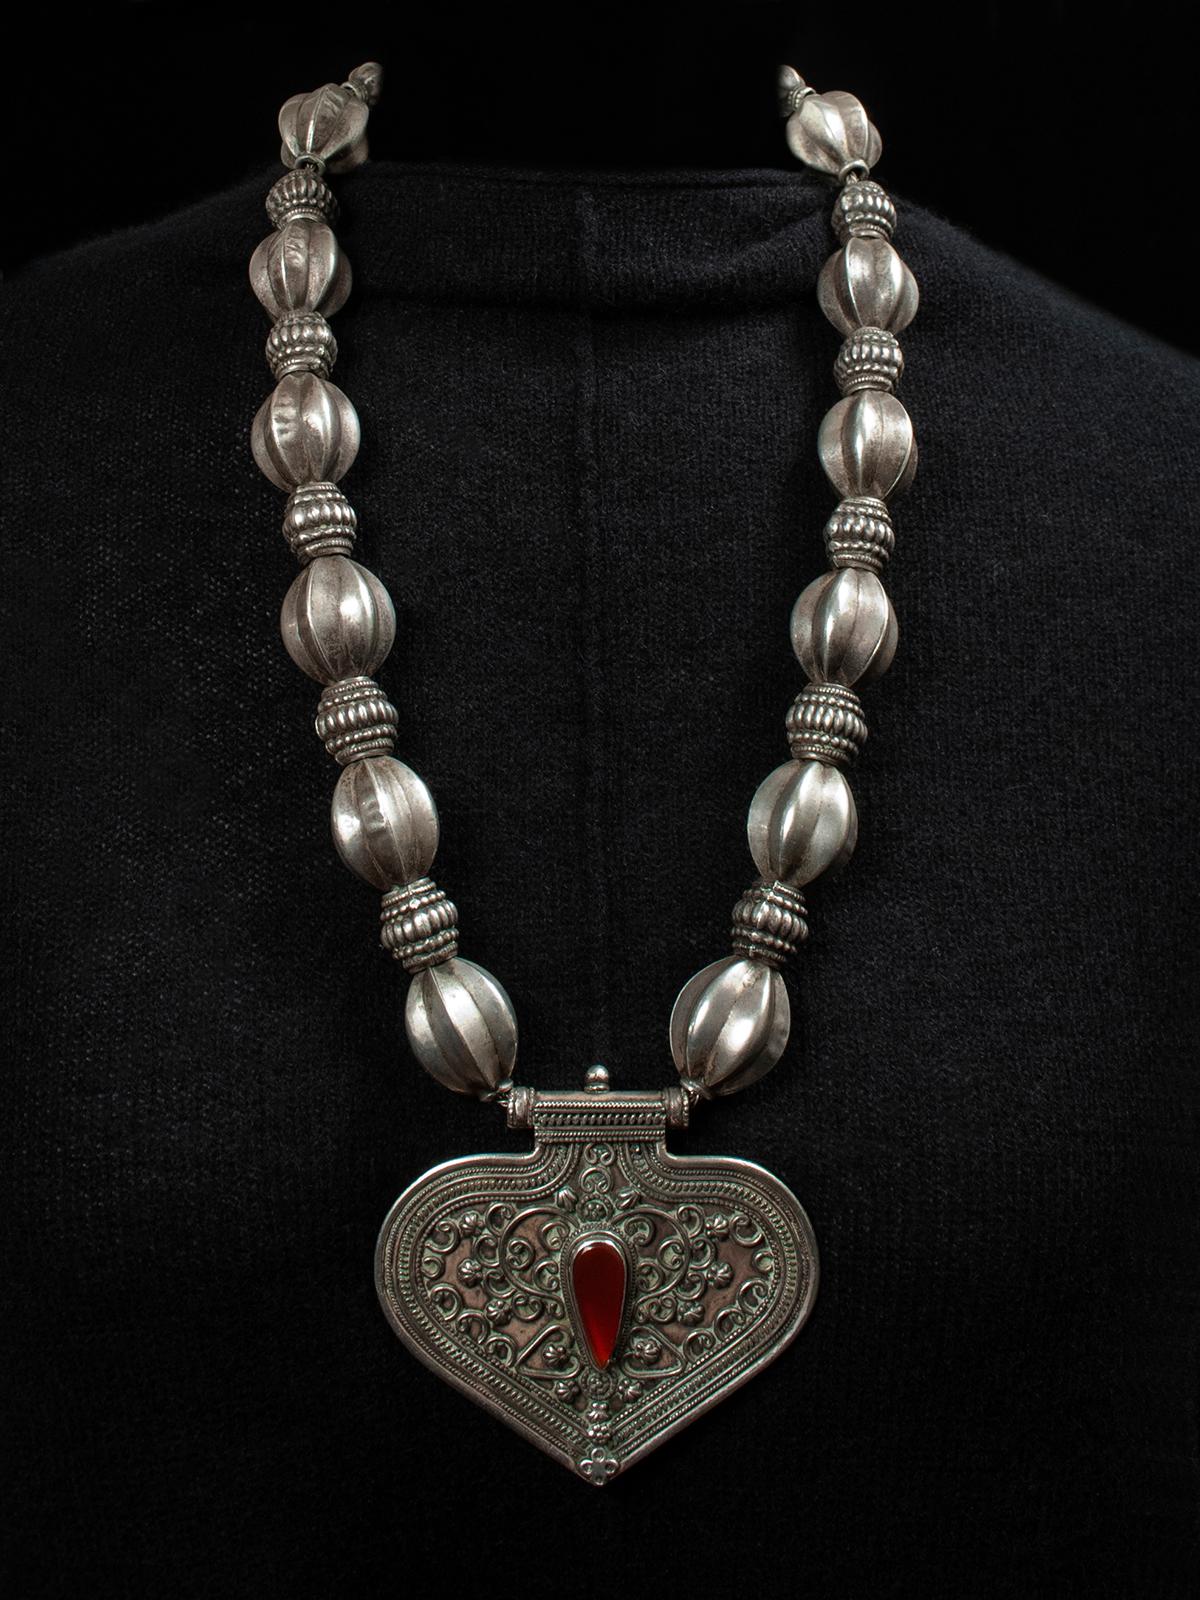 Early to Mid-20th Century Turkoman Silver necklace, Central Asia

A beautiful heart-shaped pendant with filigree design on the surface and a center teardrop of beveled glass or carnelian is strung on a braided chain with beautiful old silver